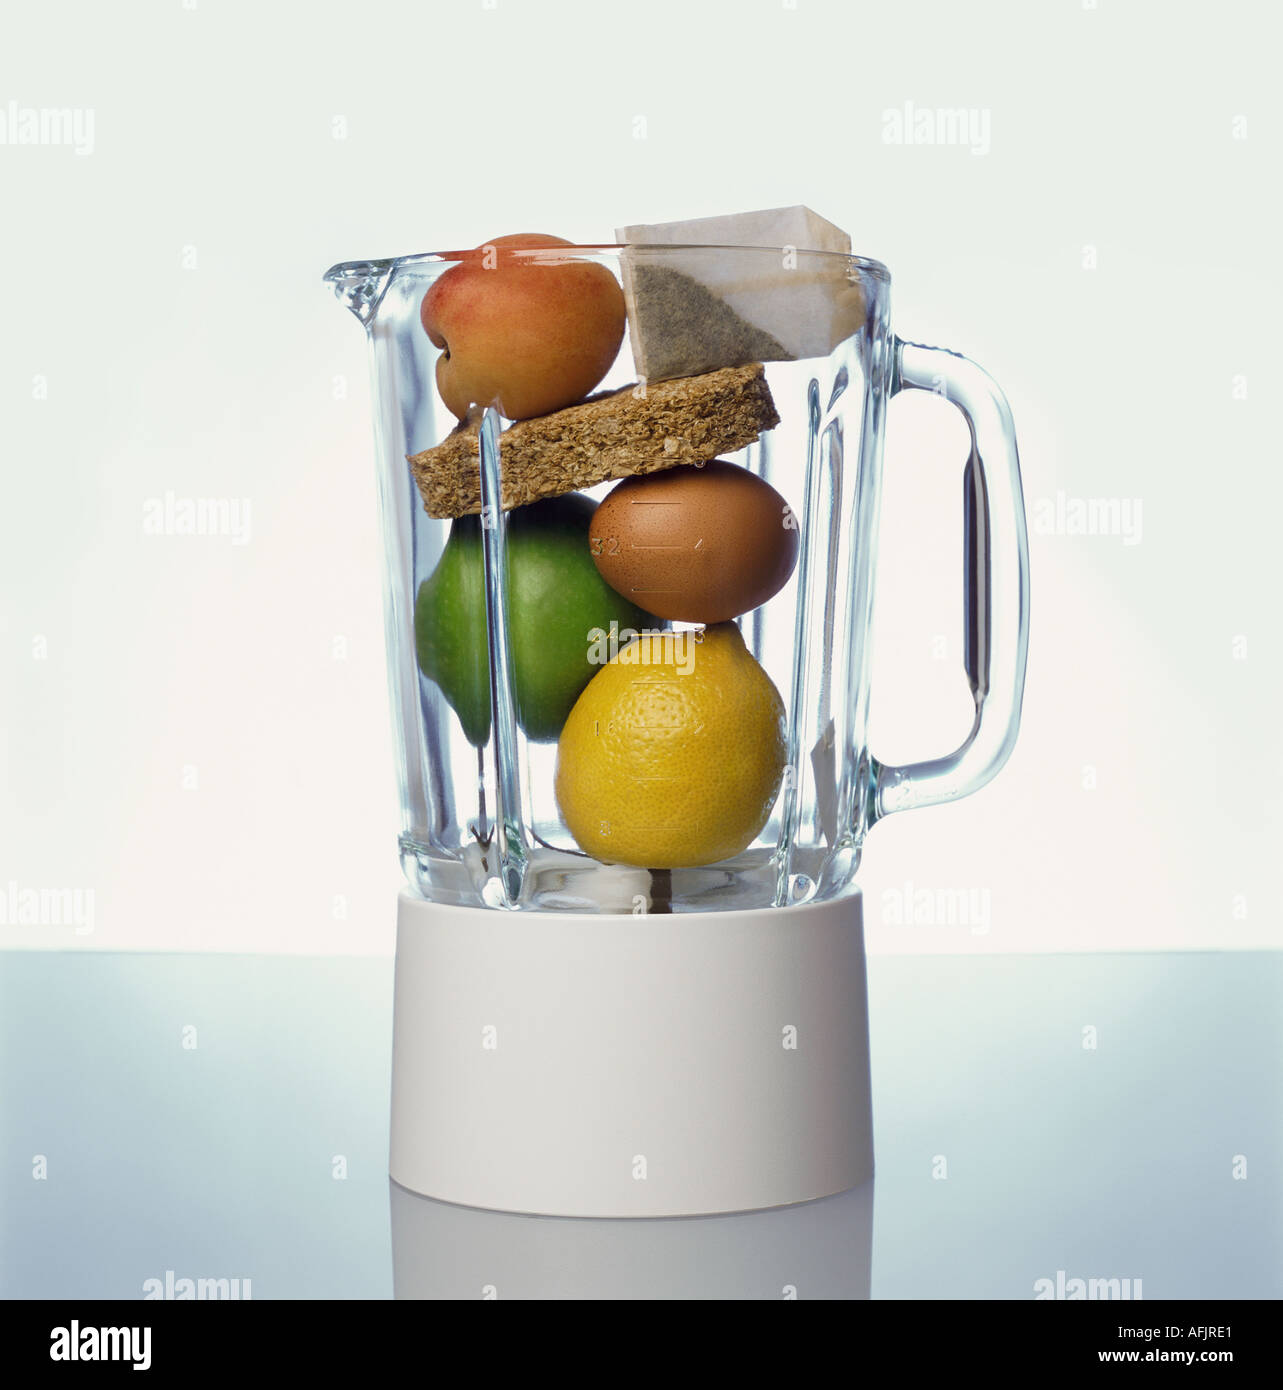 Blender containing tea bag apricot lemon lime egg wheat biscuit Stock Photo